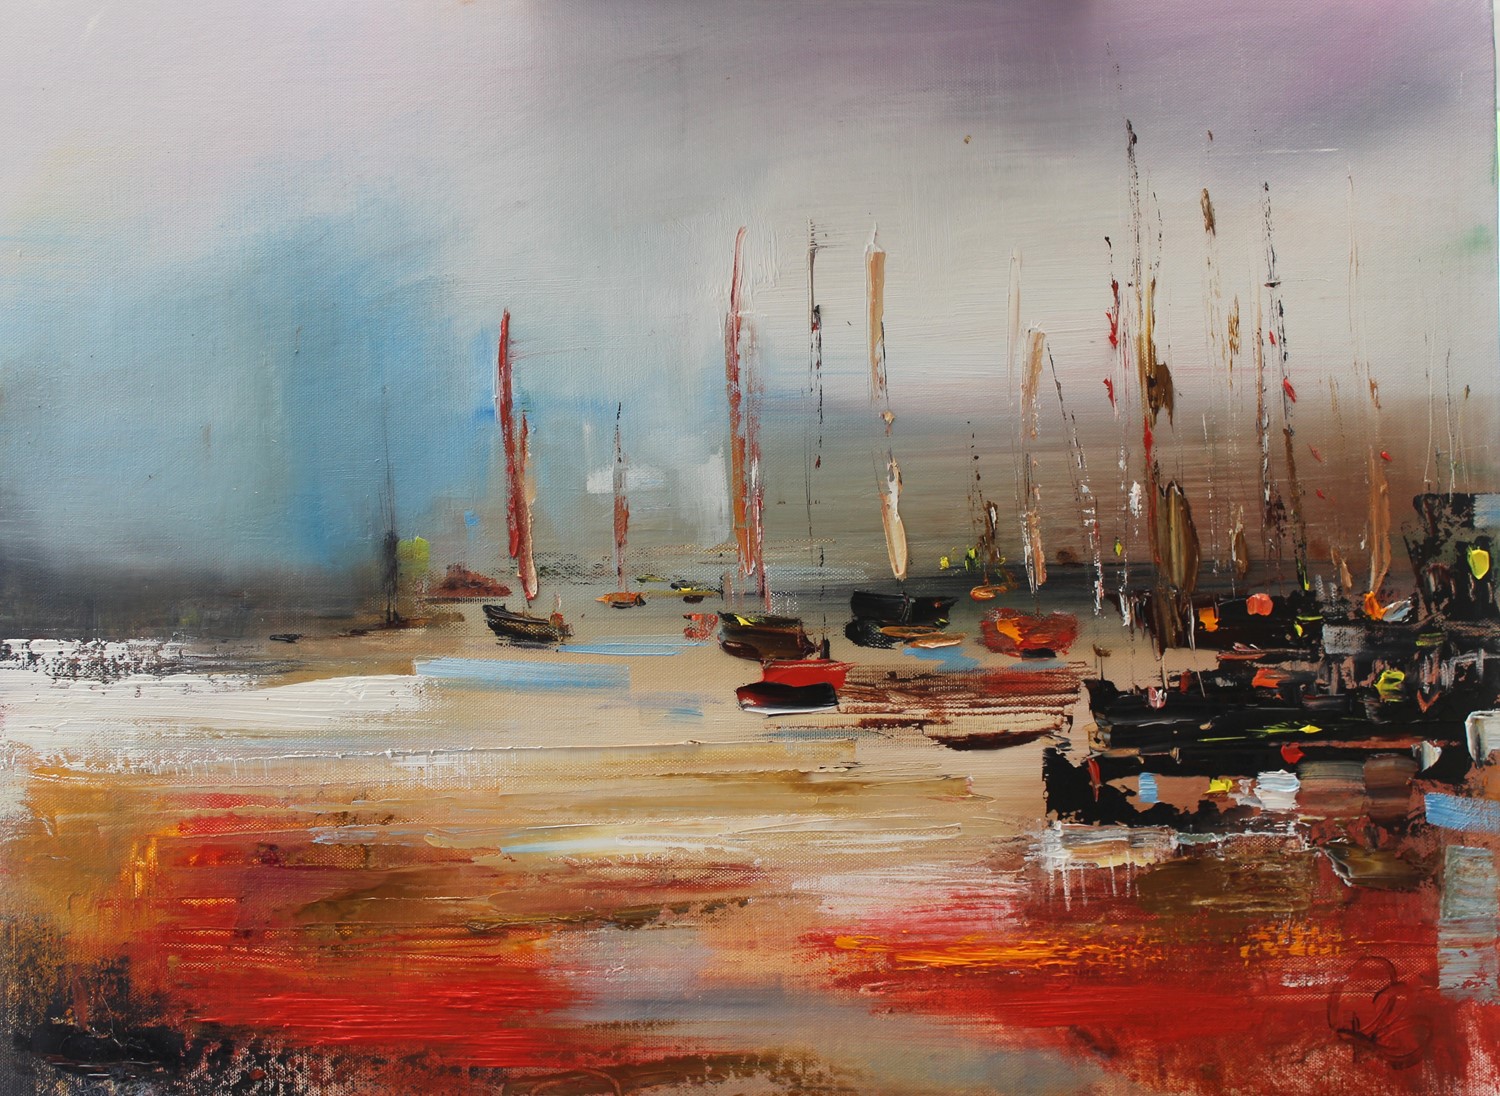 'Heading to the Harbour' by artist Rosanne Barr